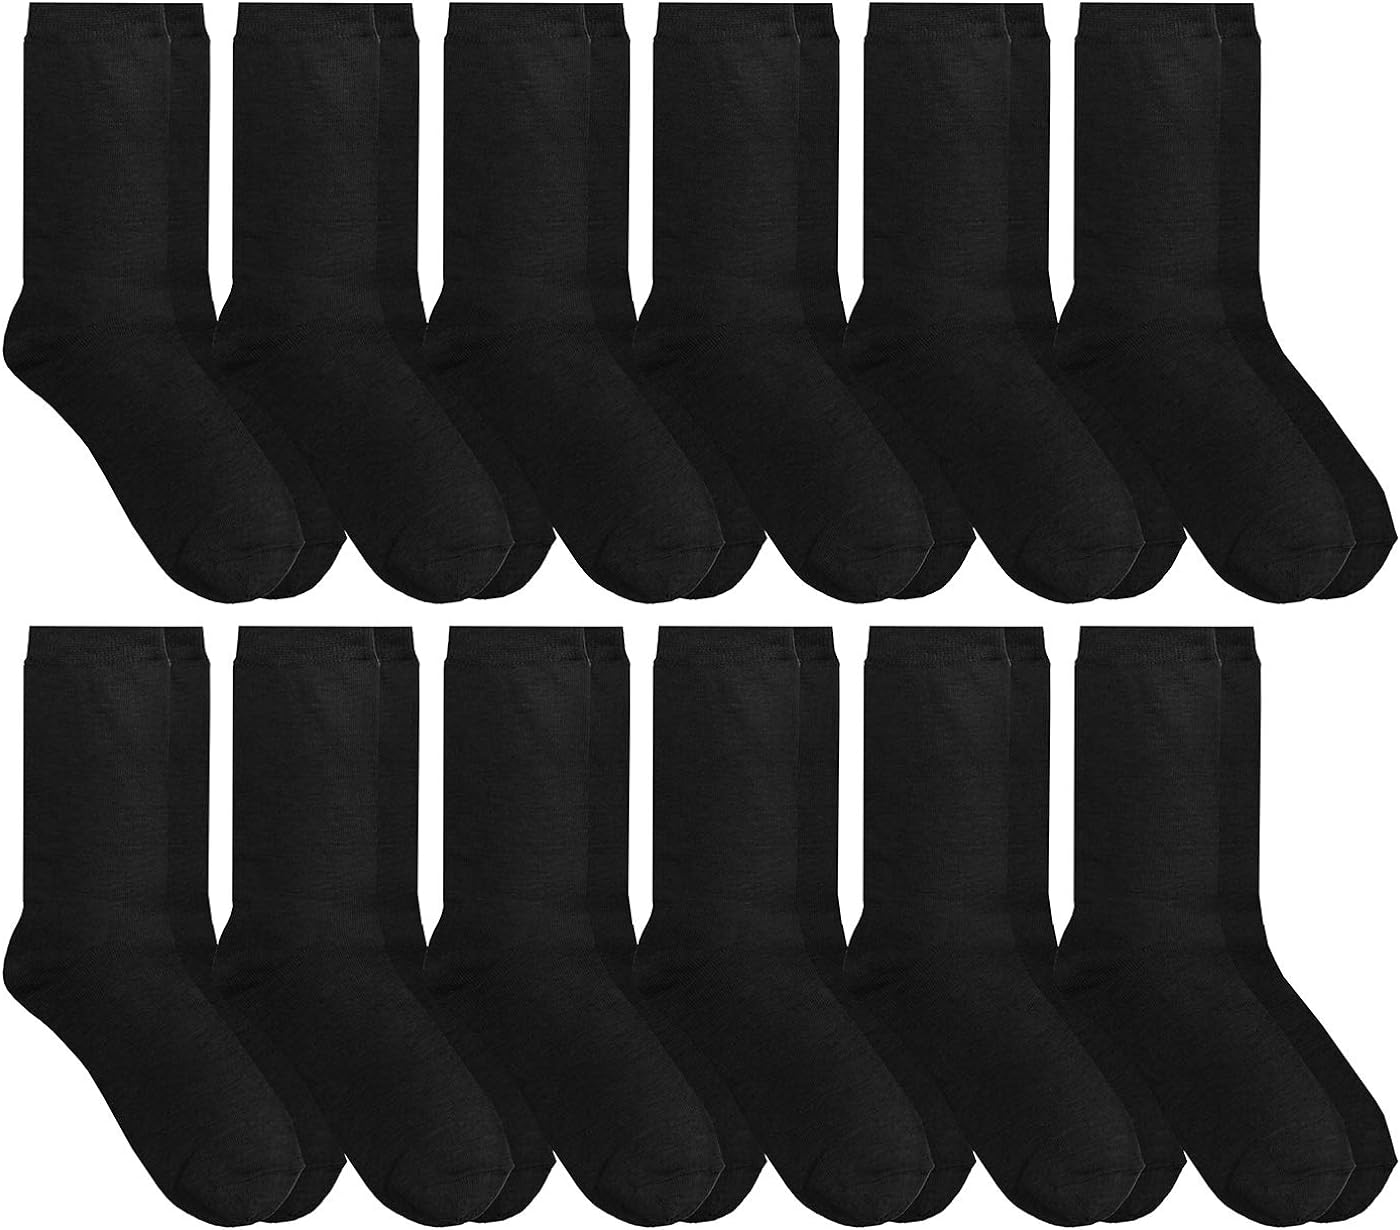 Yacht & Smith 12 Pairs of Womens Casual Crew Socks, Cotton Colorful Fun Patterns, Women Solid Dress Sock (12 Pairs Solid Black)